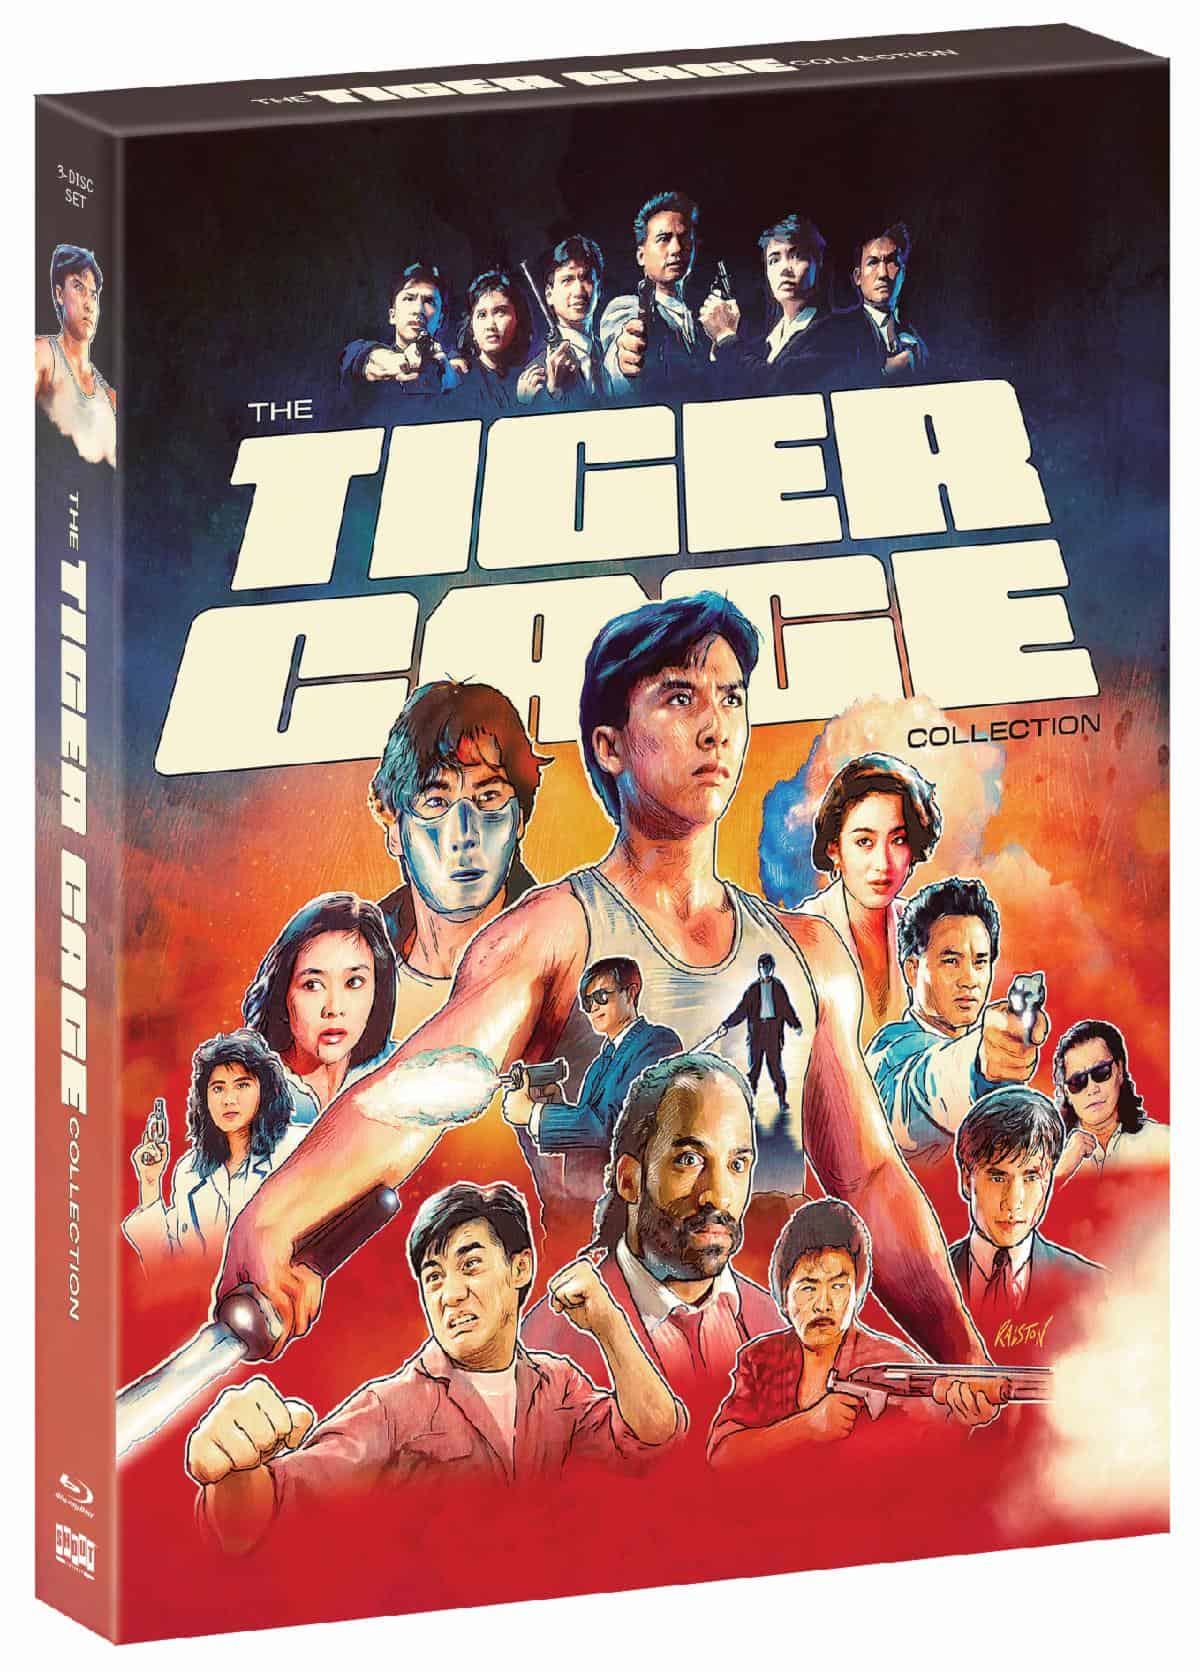 The Tiger Cage Collection hits Blu-ray on May 9th from Shout! 17